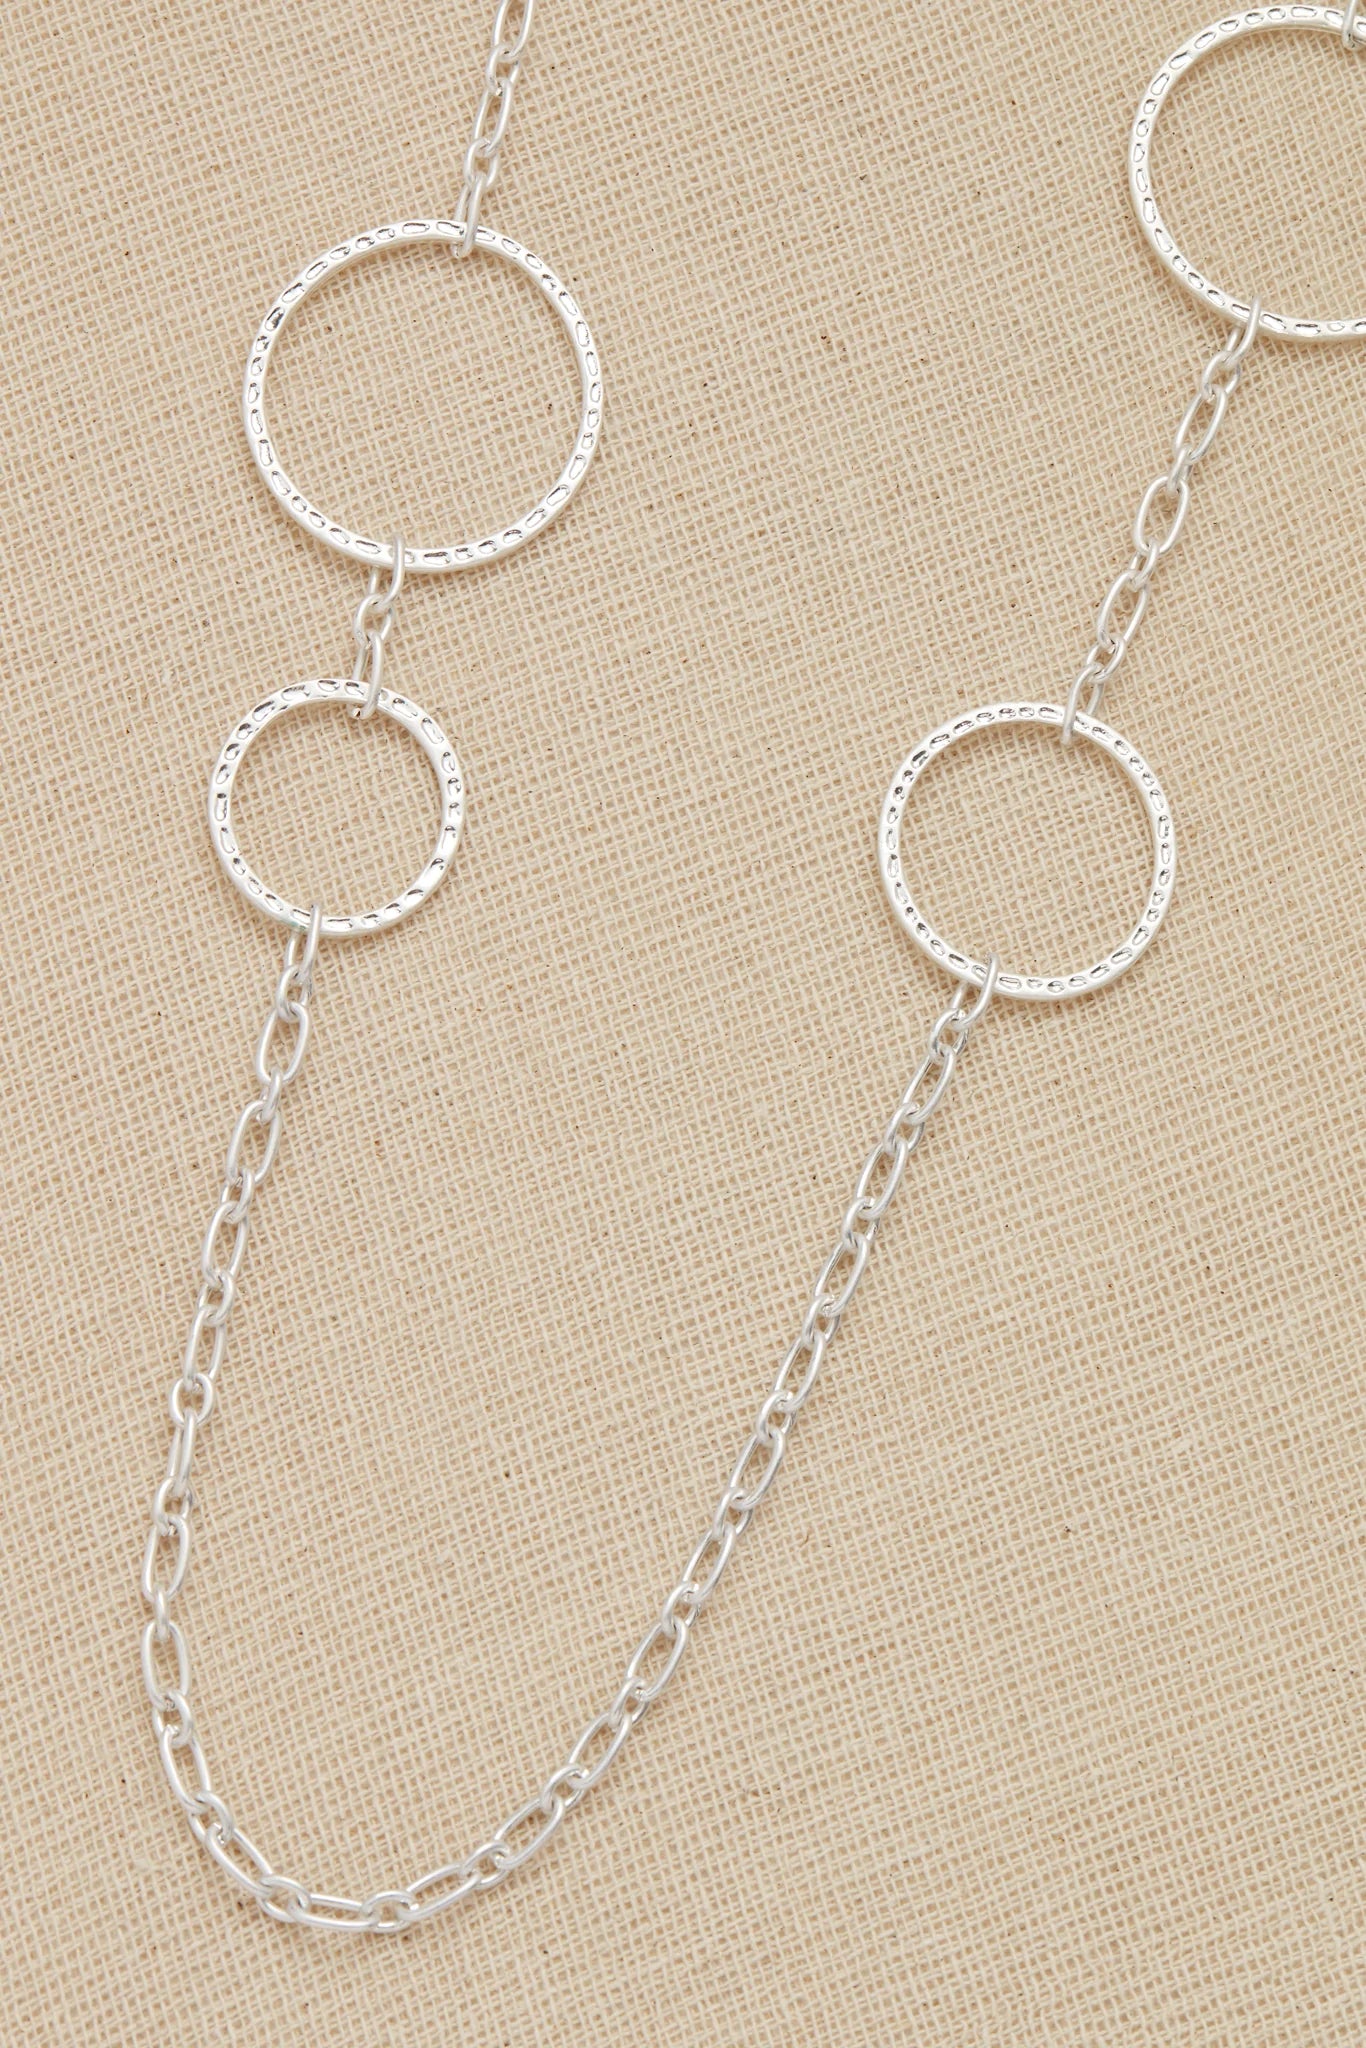 Envy long silver necklace with textured loops